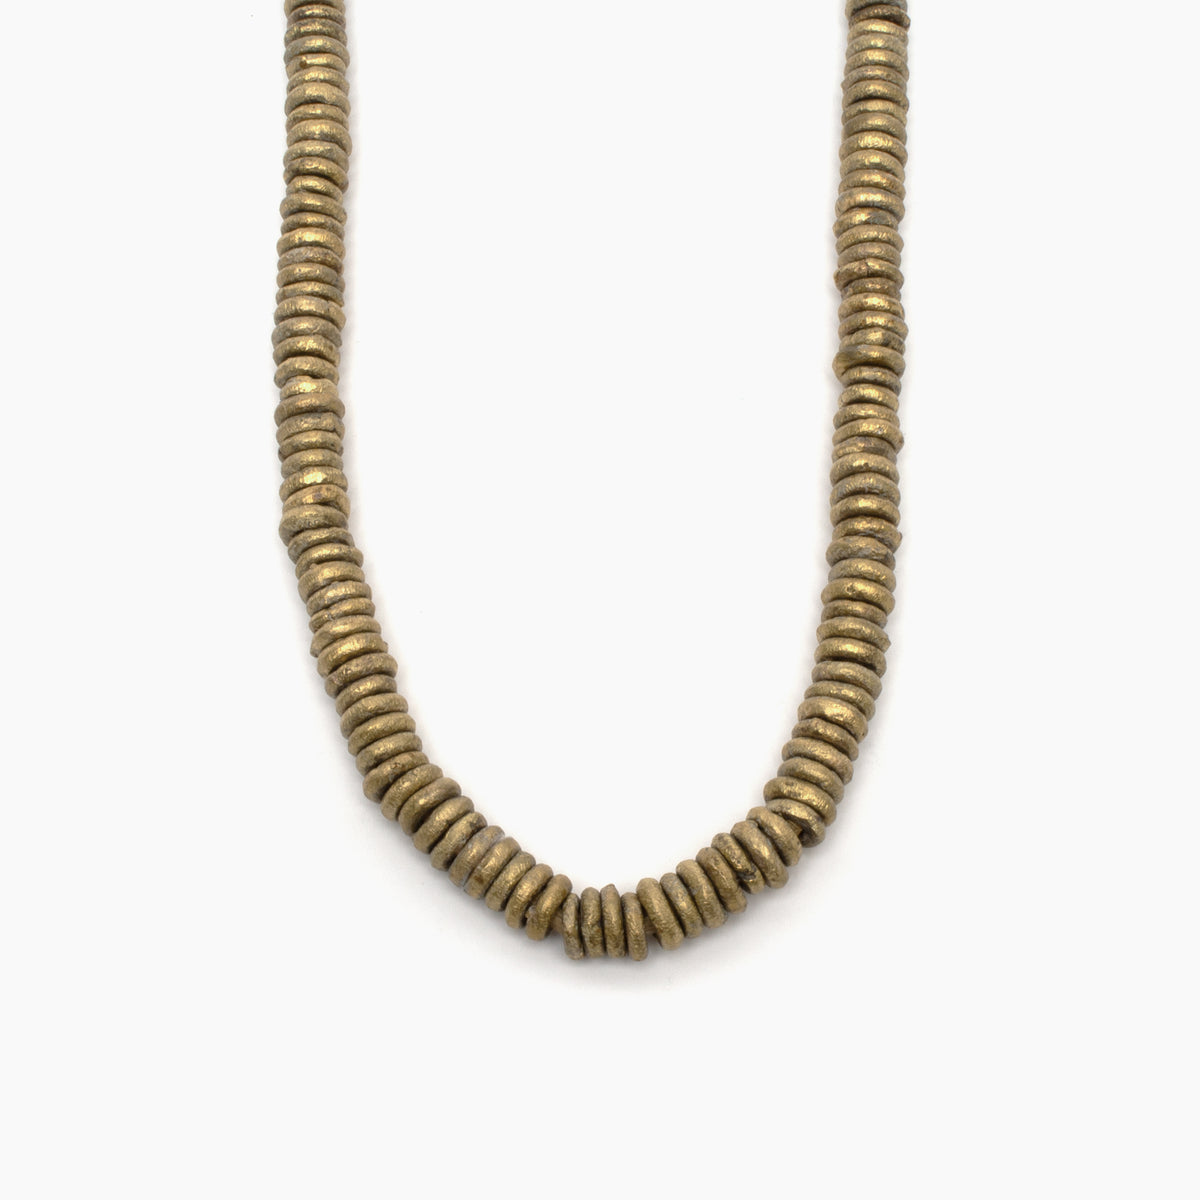 Strand of Brass Rings from Nigeria